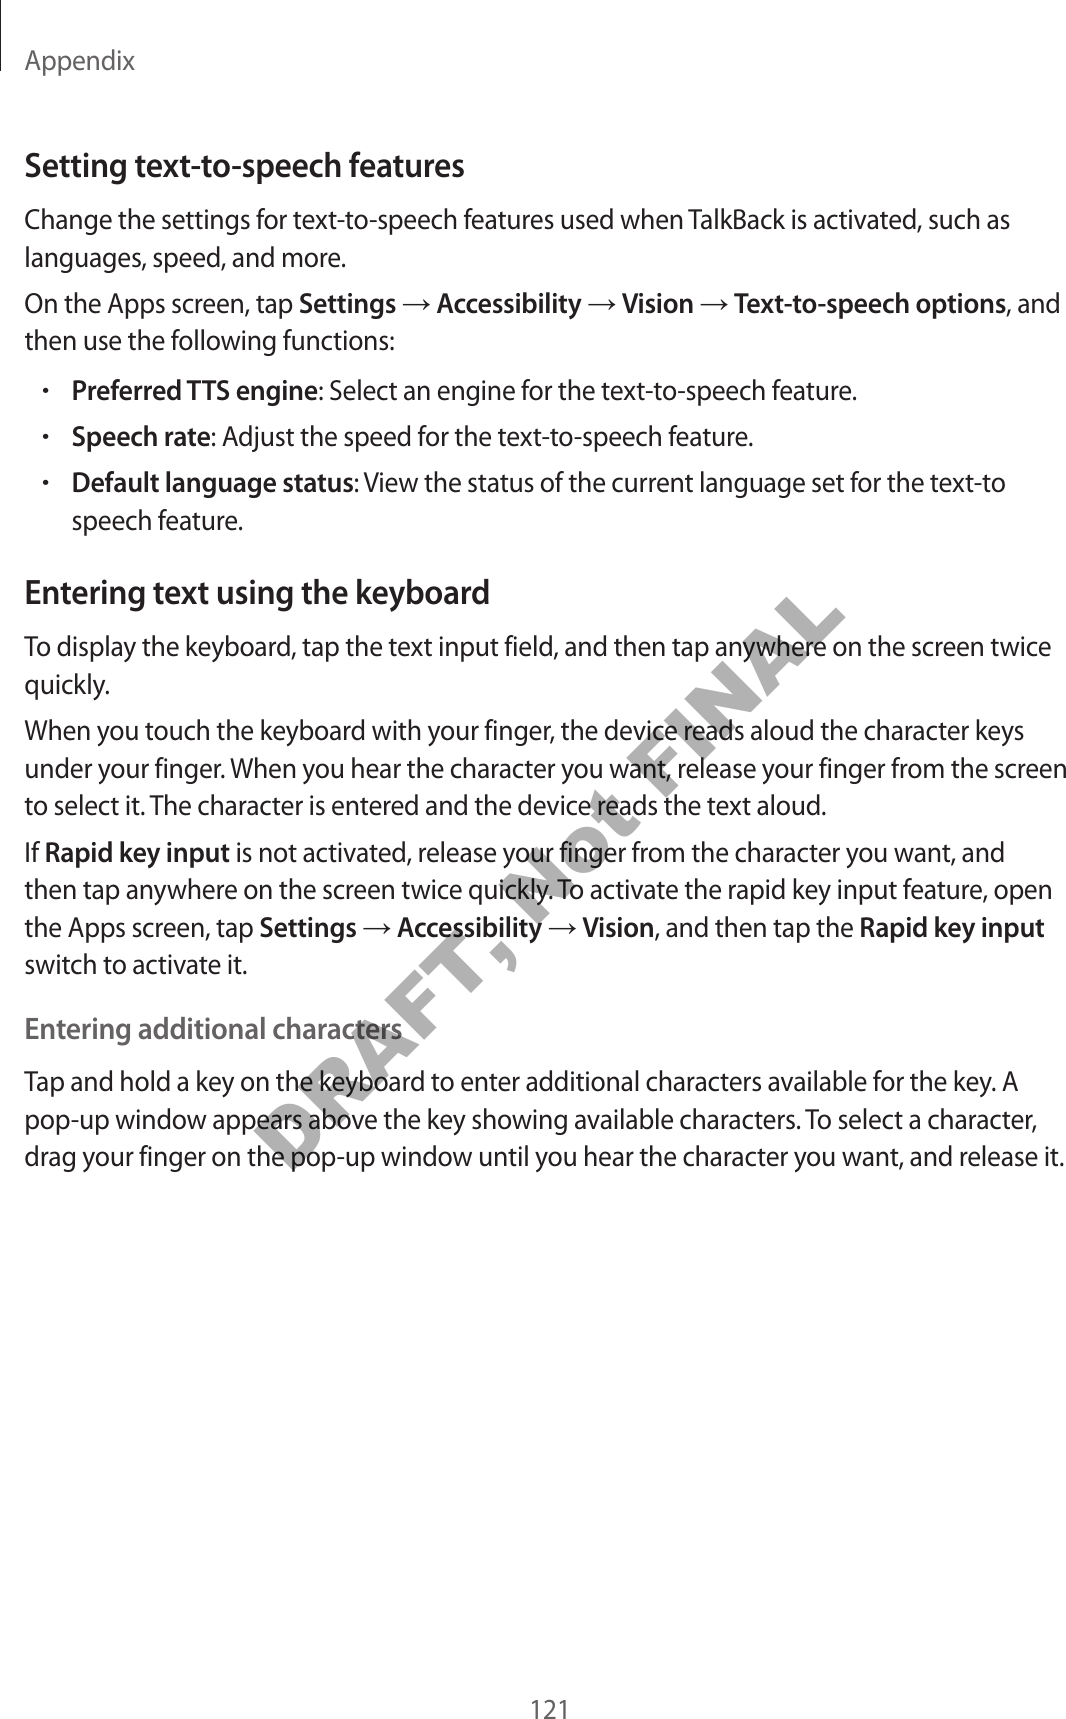 Appendix121Setting text-to-speech featuresChange the settings for text-to-speech features used when TalkBack is activated, such as languages, speed, and more.On the Apps screen, tap Settings  Accessibility  Vision  Text-to-speech options, and then use the following functions:•Preferred TTS engine: Select an engine for the text-to-speech feature.•Speech rate: Adjust the speed for the text-to-speech feature.•Default language status: View the status of the current language set for the text-tospeech feature.Entering text using the keyboardTo display the keyboard, tap the text input field, and then tap anywhere on the screen twice quickly.When you touch the keyboard with your finger, the device reads aloud the character keys under your finger. When you hear the character you want, release your finger from the screen to select it. The character is entered and the device reads the text aloud.If Rapid key input is not activated, release your finger from the character you want, and then tap anywhere on the screen twice quickly. To activate the rapid key input feature, open the Apps screen, tap Settings  Accessibility  Vision, and then tap the Rapid key input switch to activate it.Entering additional charactersTap and hold a key on the keyboard to enter additional characters available for the key. A pop-up window appears above the key showing available characters. To select a character, drag your finger on the pop-up window until you hear the character you want, and release it.DRAFT, Not FINAL